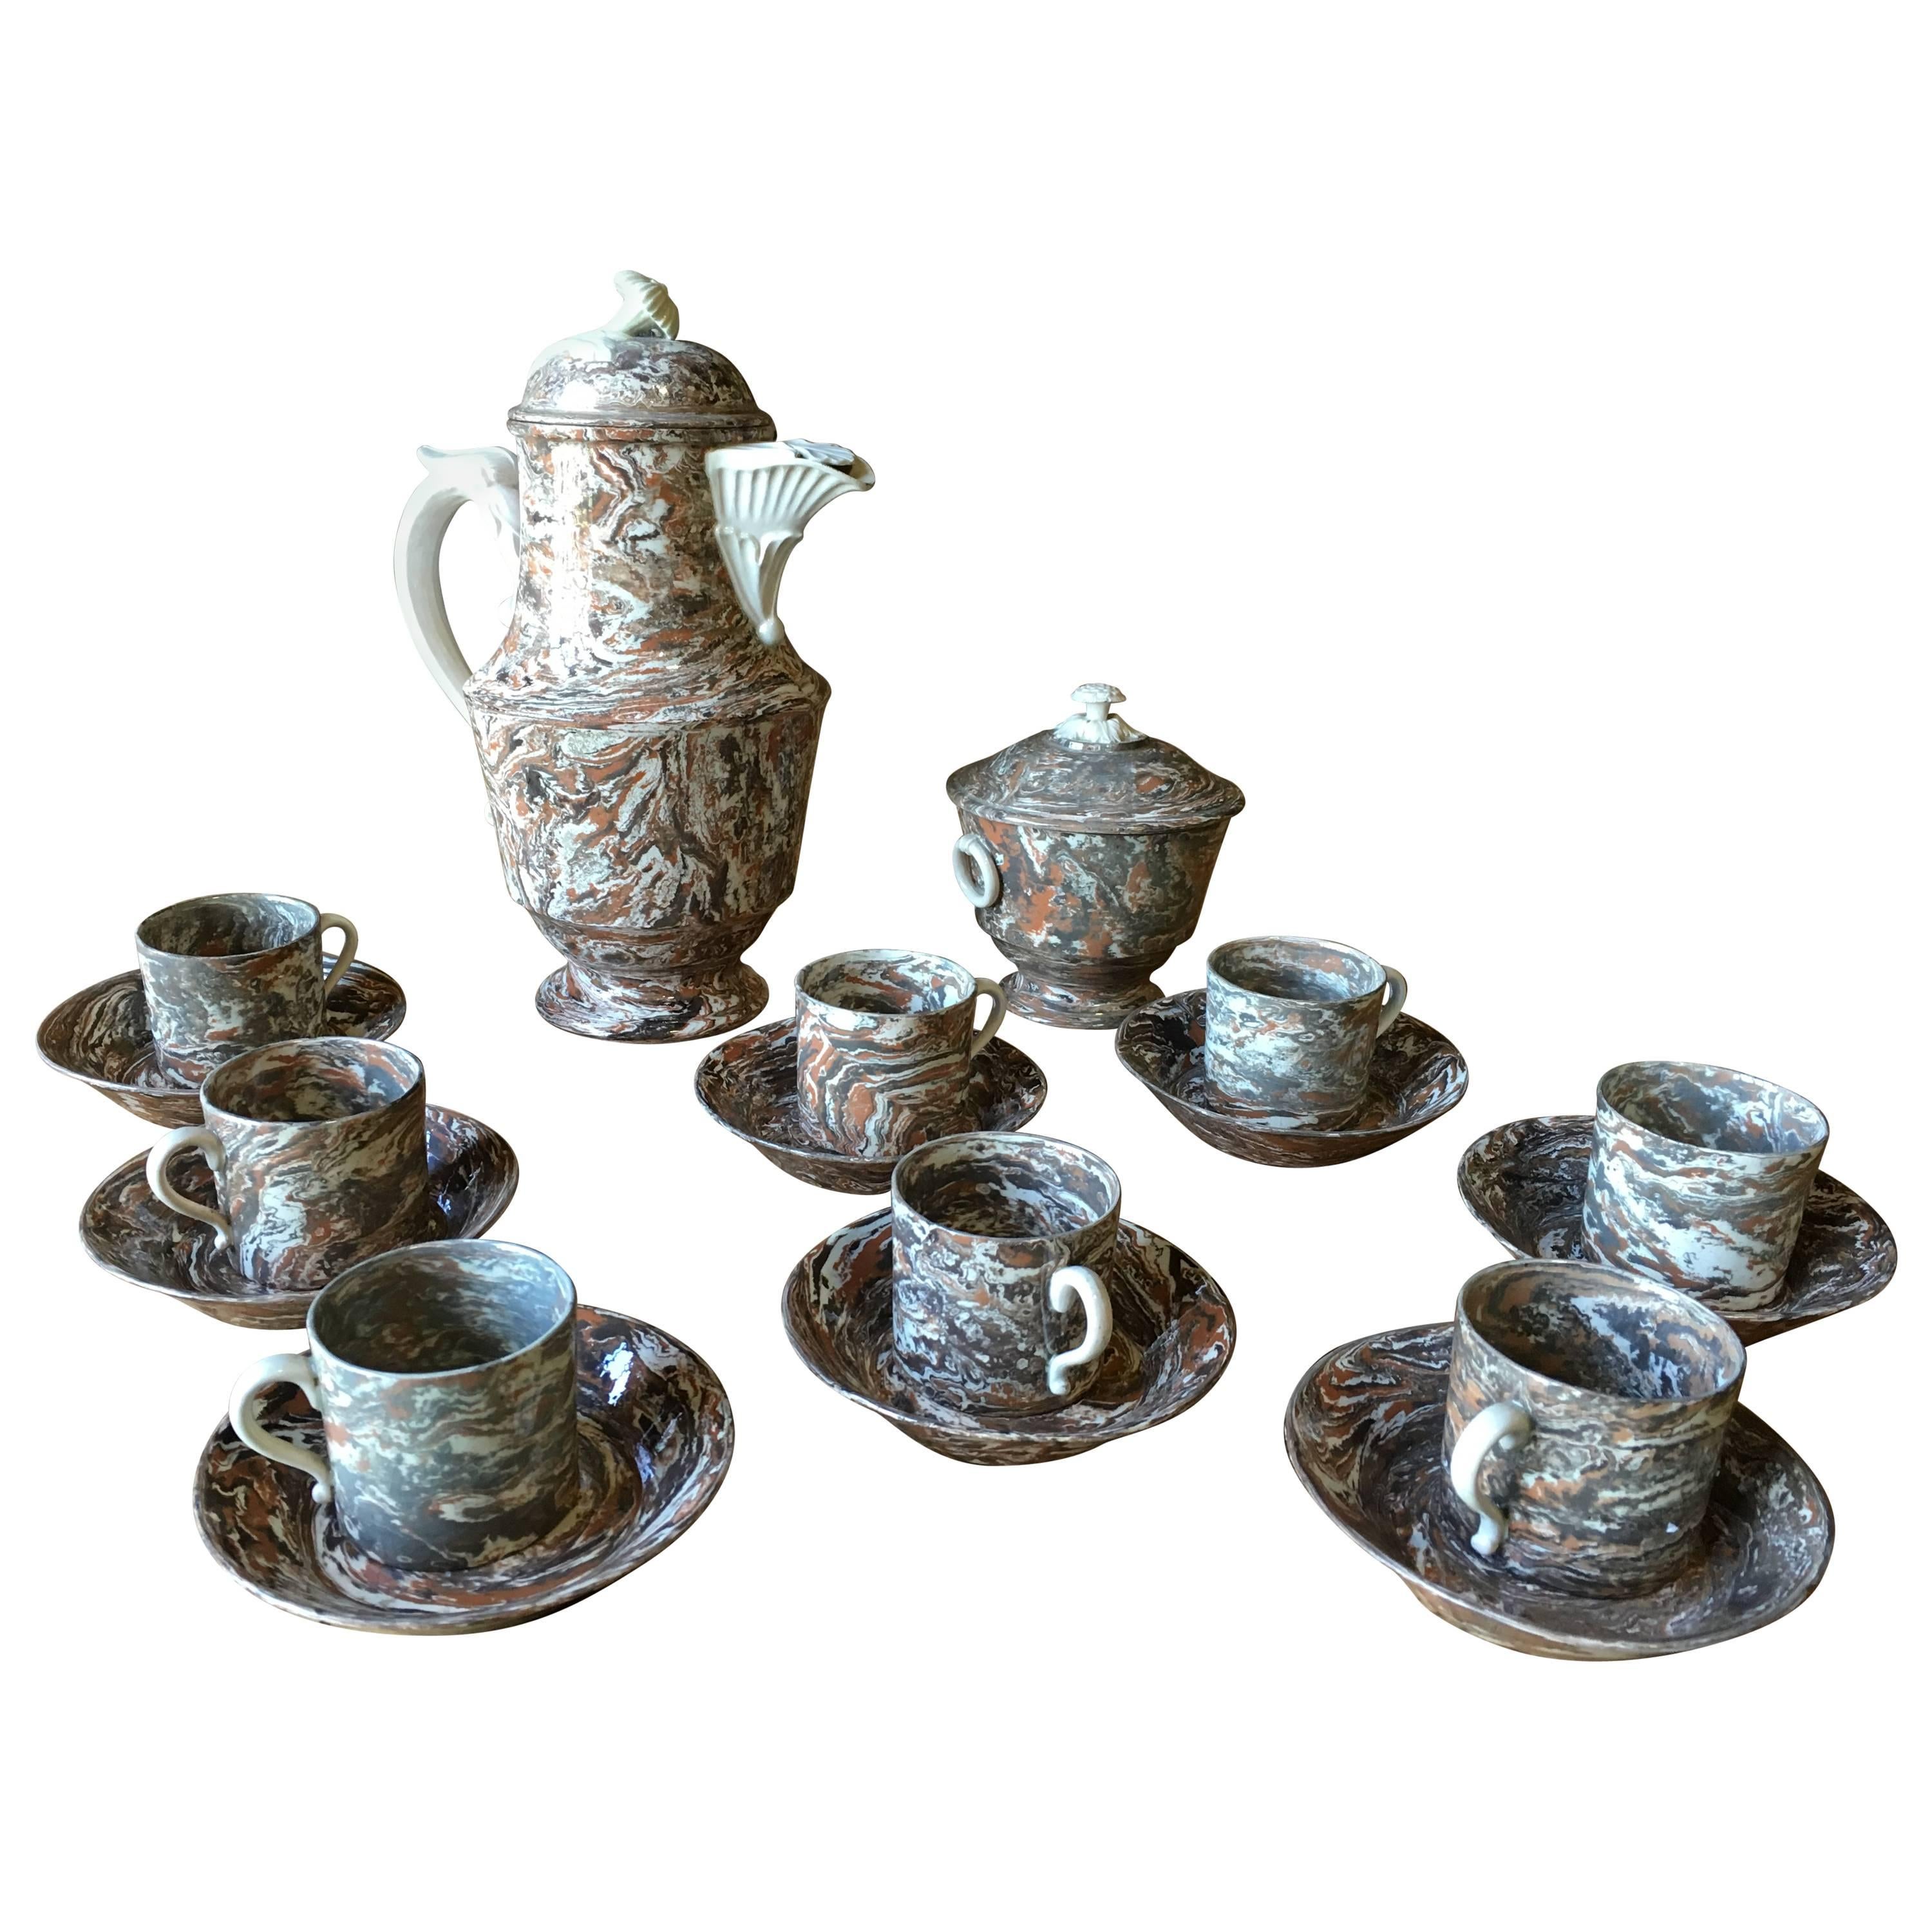 Rare Early 19th Century Demitasse Coffee Set from Apt, France